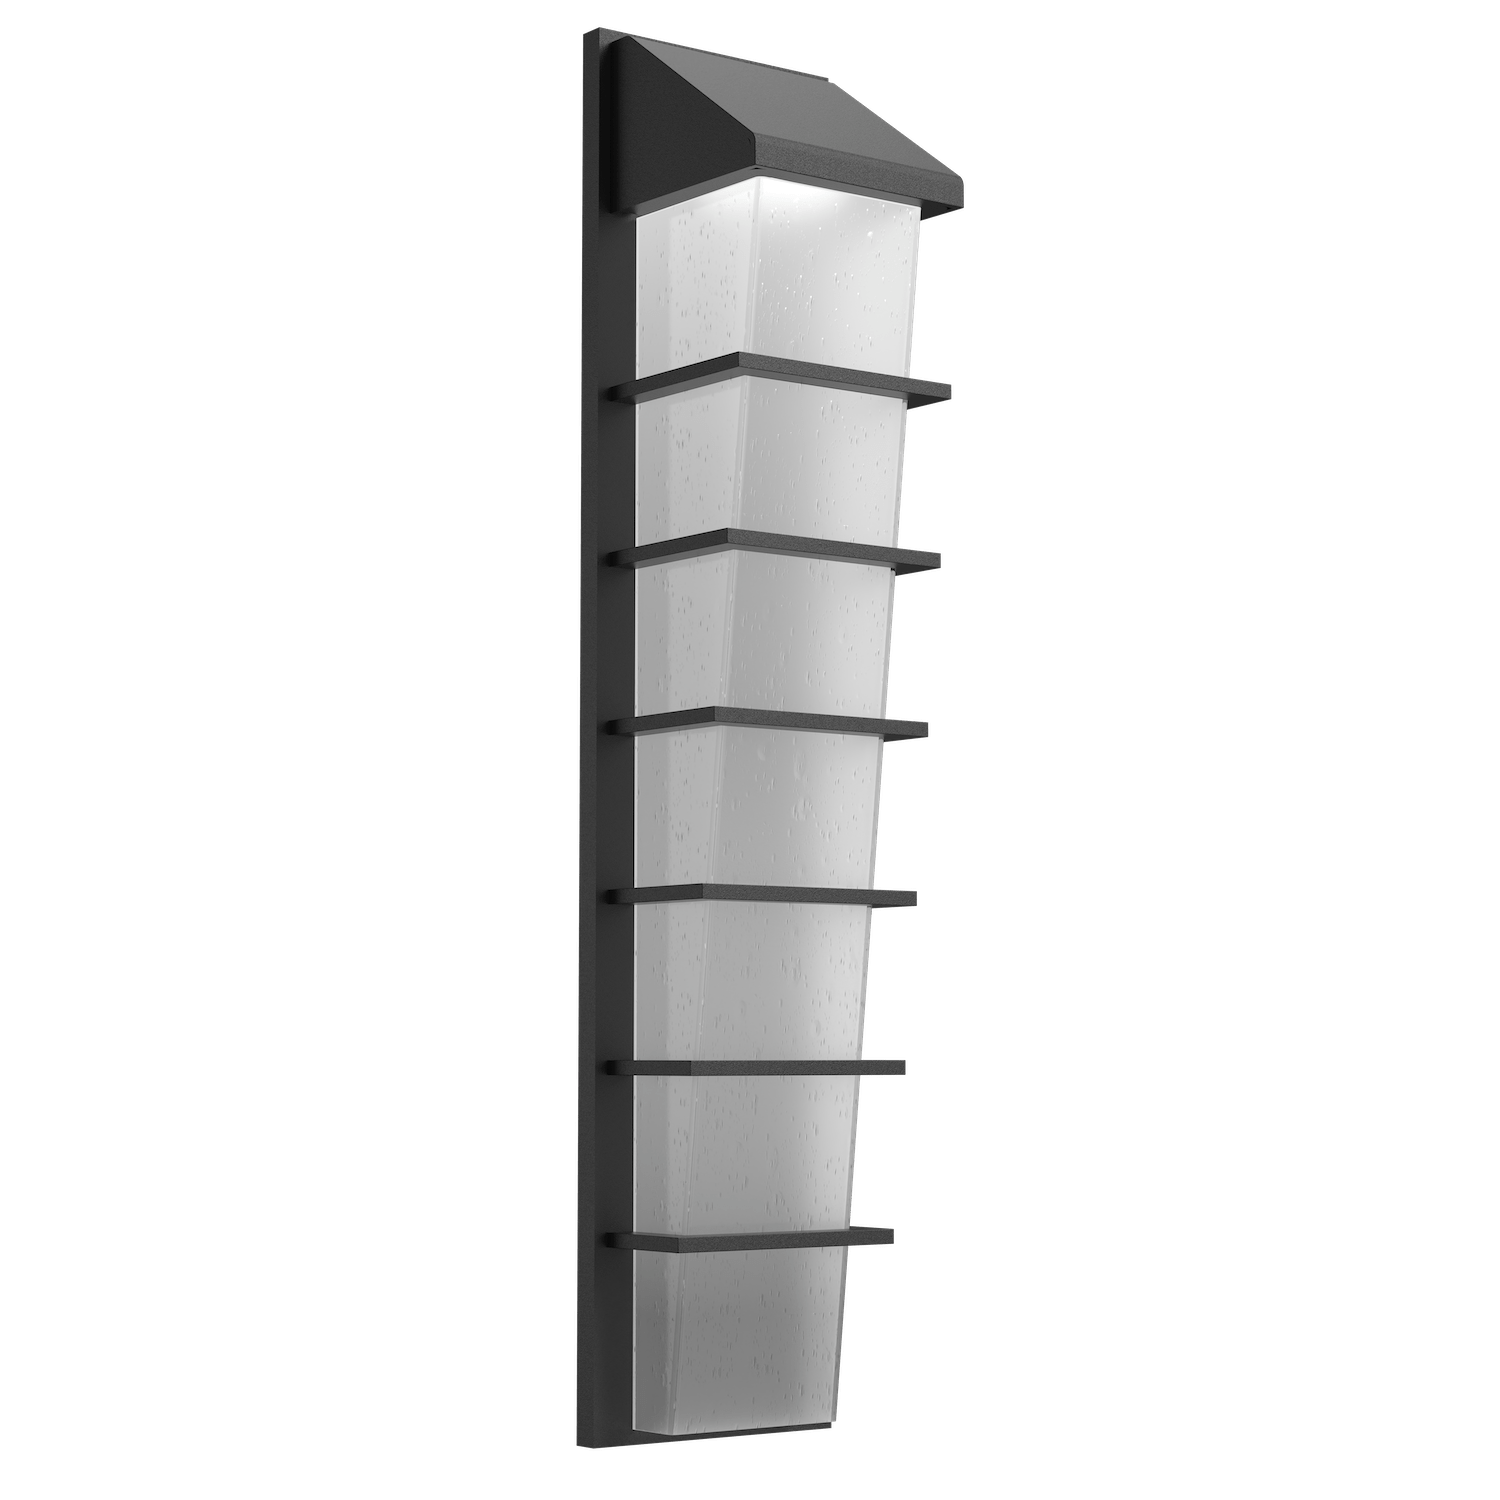 ODB0081-02-TB-FS-Hammerton-Studio-Mantle-24-inch-outdoor-sconce-with-textured-black-finish-and-frosted-glass-shade-and-LED-lamping